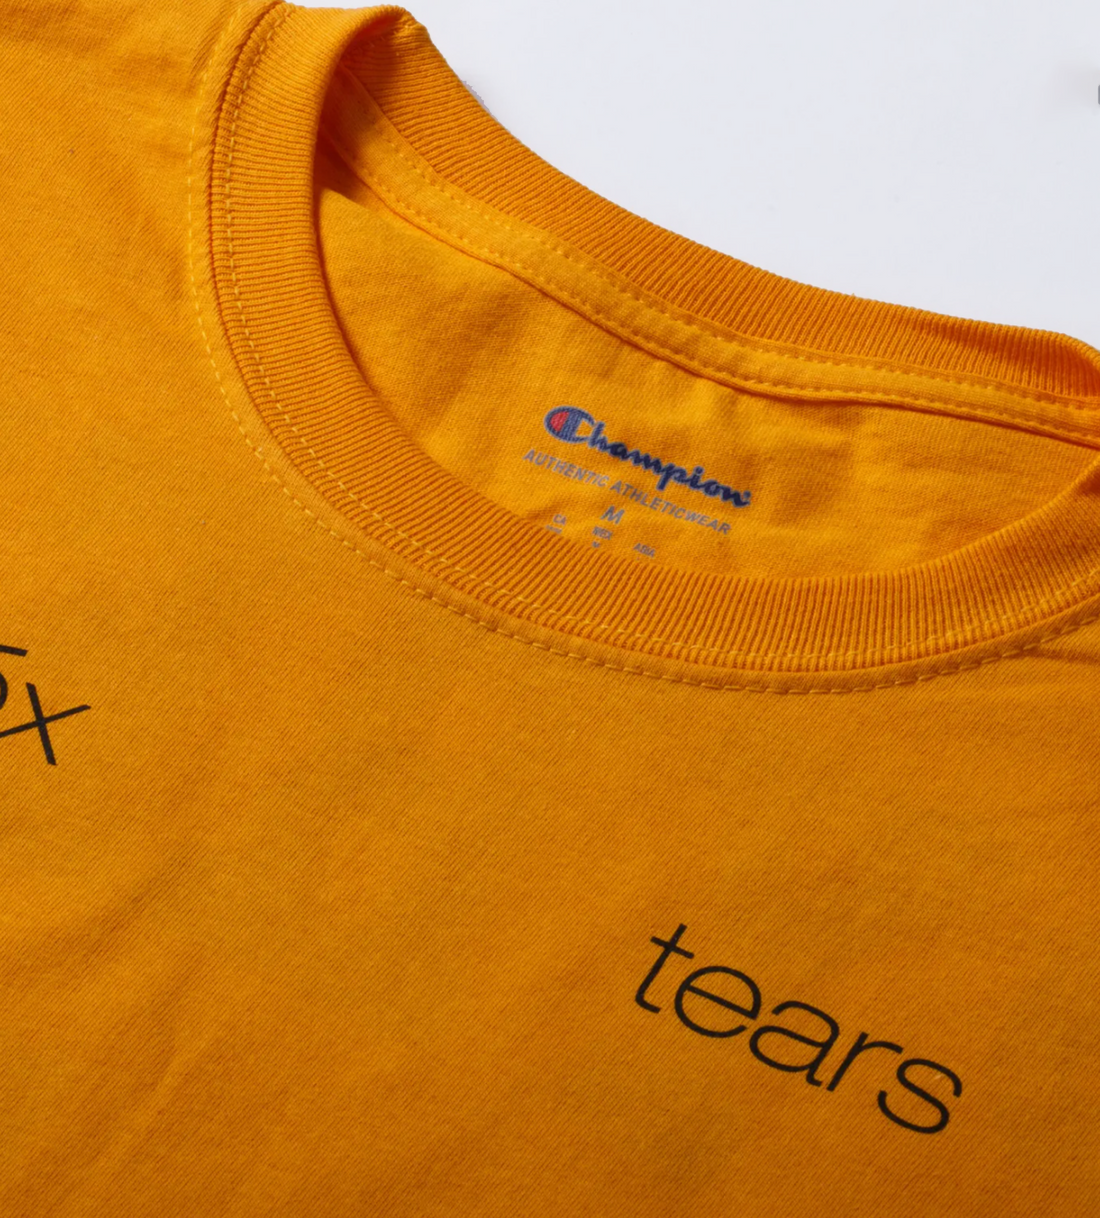 Pryex x Denim Tears Yellow Pryex Tee, Front Side Angle View